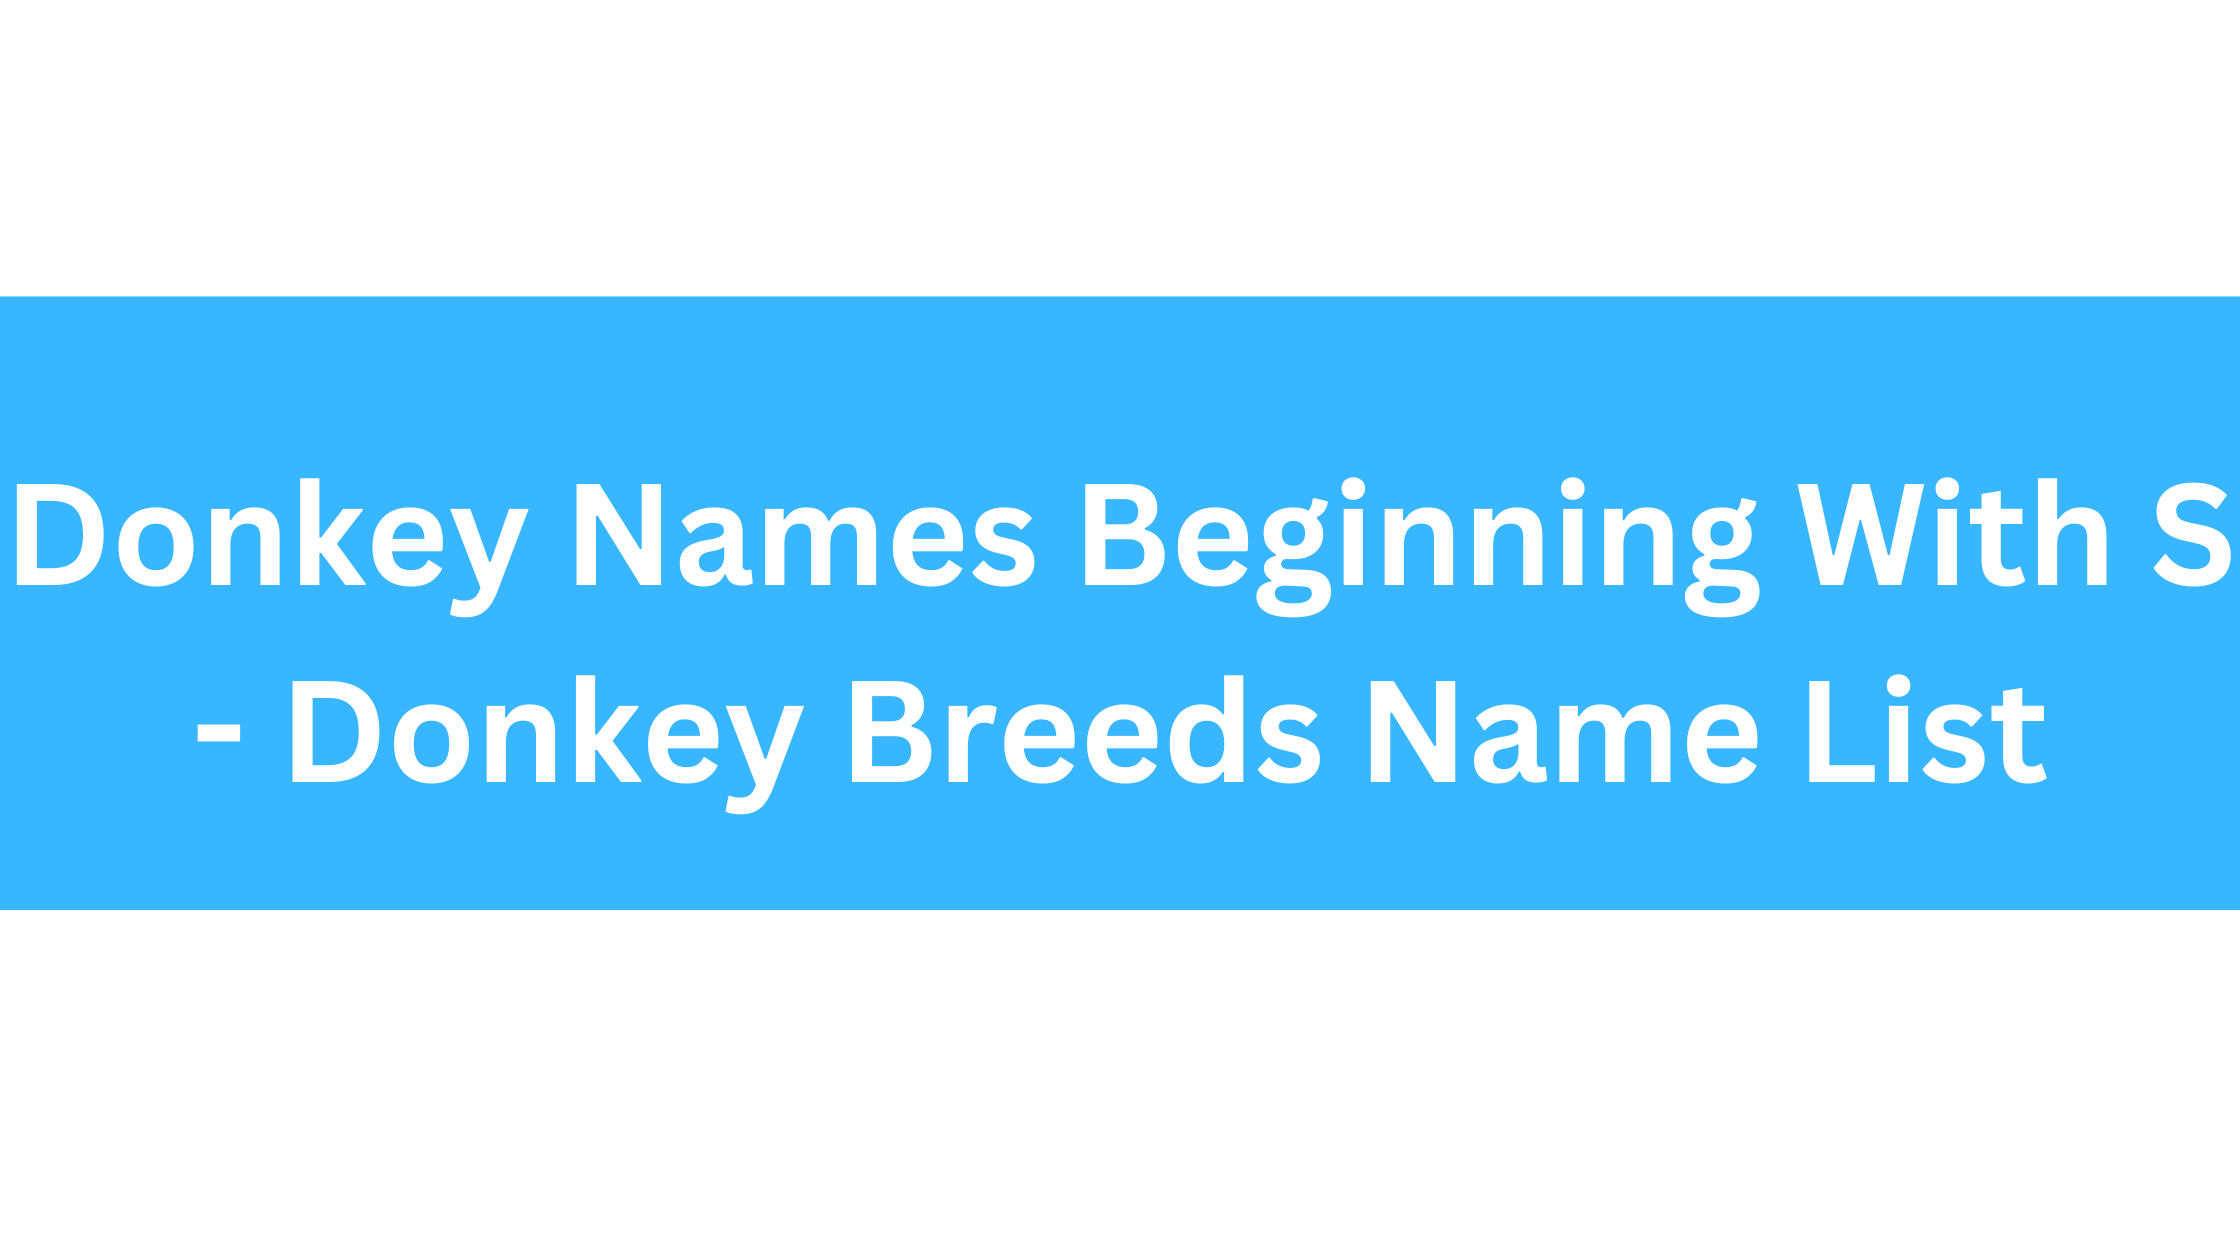 Donkey Names Beginning With S